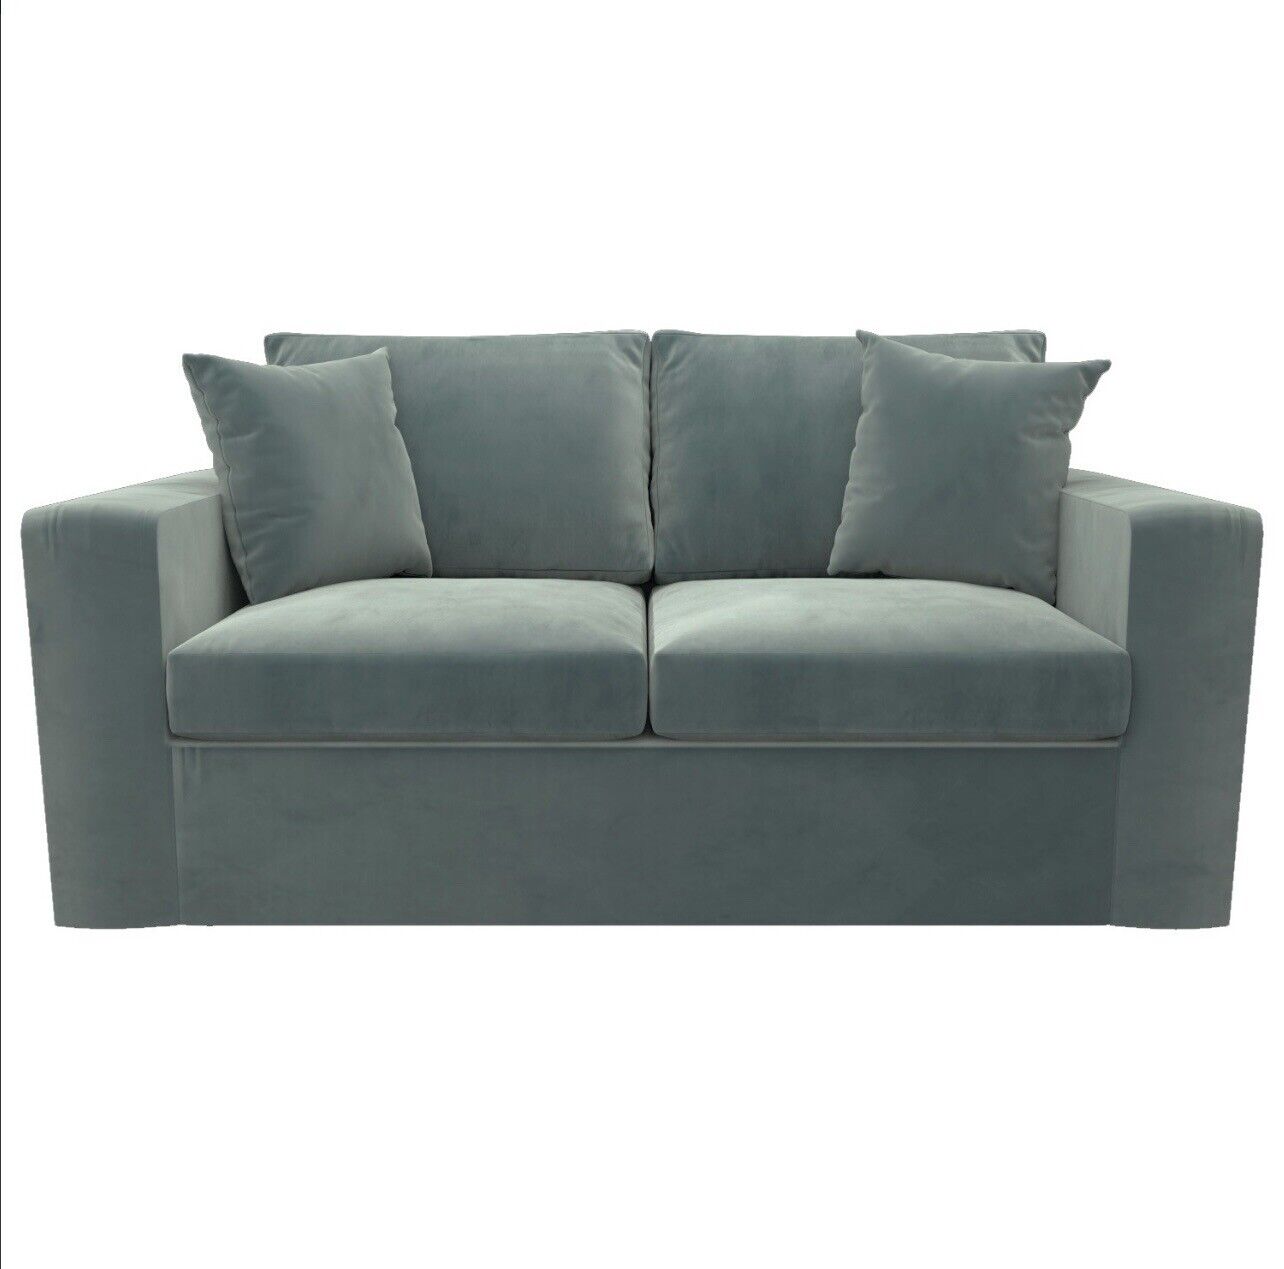 Green Sofa Bed 2 Seater in Velvet with Cushions